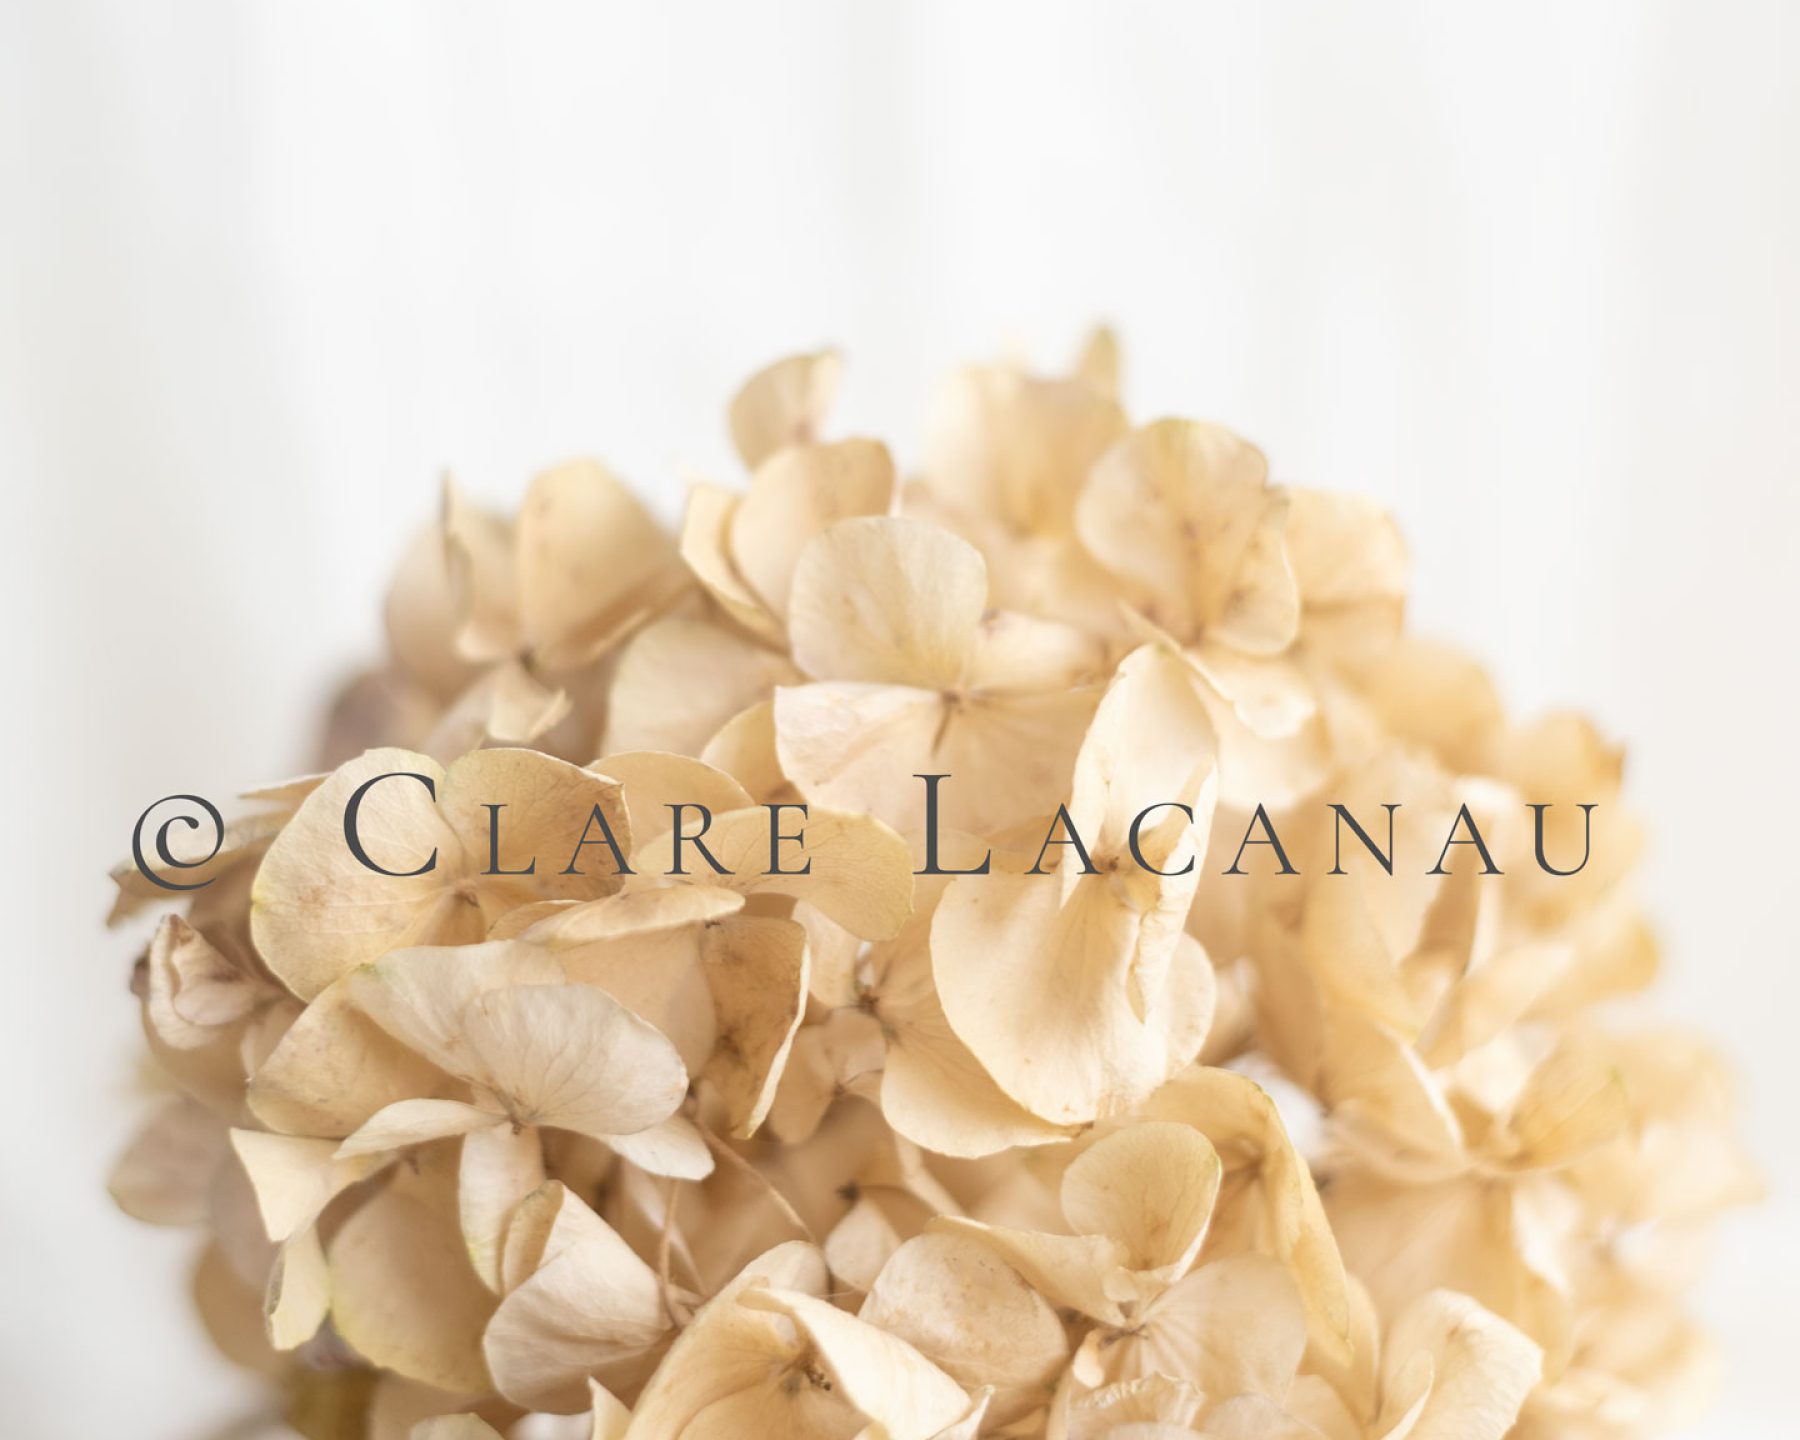 Photograph of a dried hydrangea head on a light white background